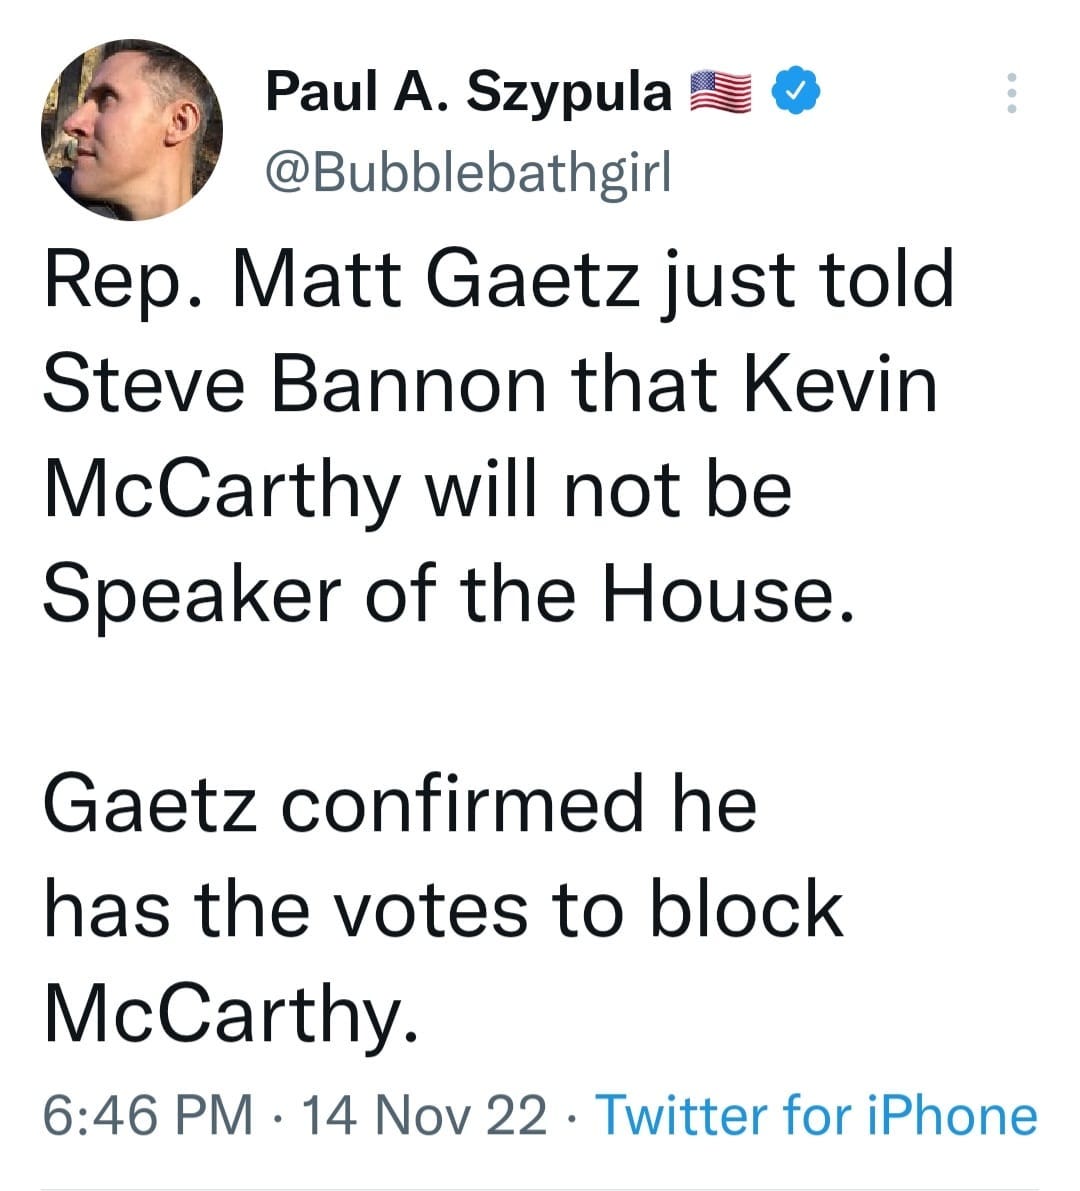 May be a Twitter screenshot of 1 person and text that says 'Paul A. Szypula @Bubblebathgirl Rep. Matt Gaetz just told Steve Bannon that Kevin McCarthy will not be Speaker of the House. Gaetz confirmed he has the votes to block McCarthy. 6:46 PM. 14 Nov 22 22 Twitter for iPhone'